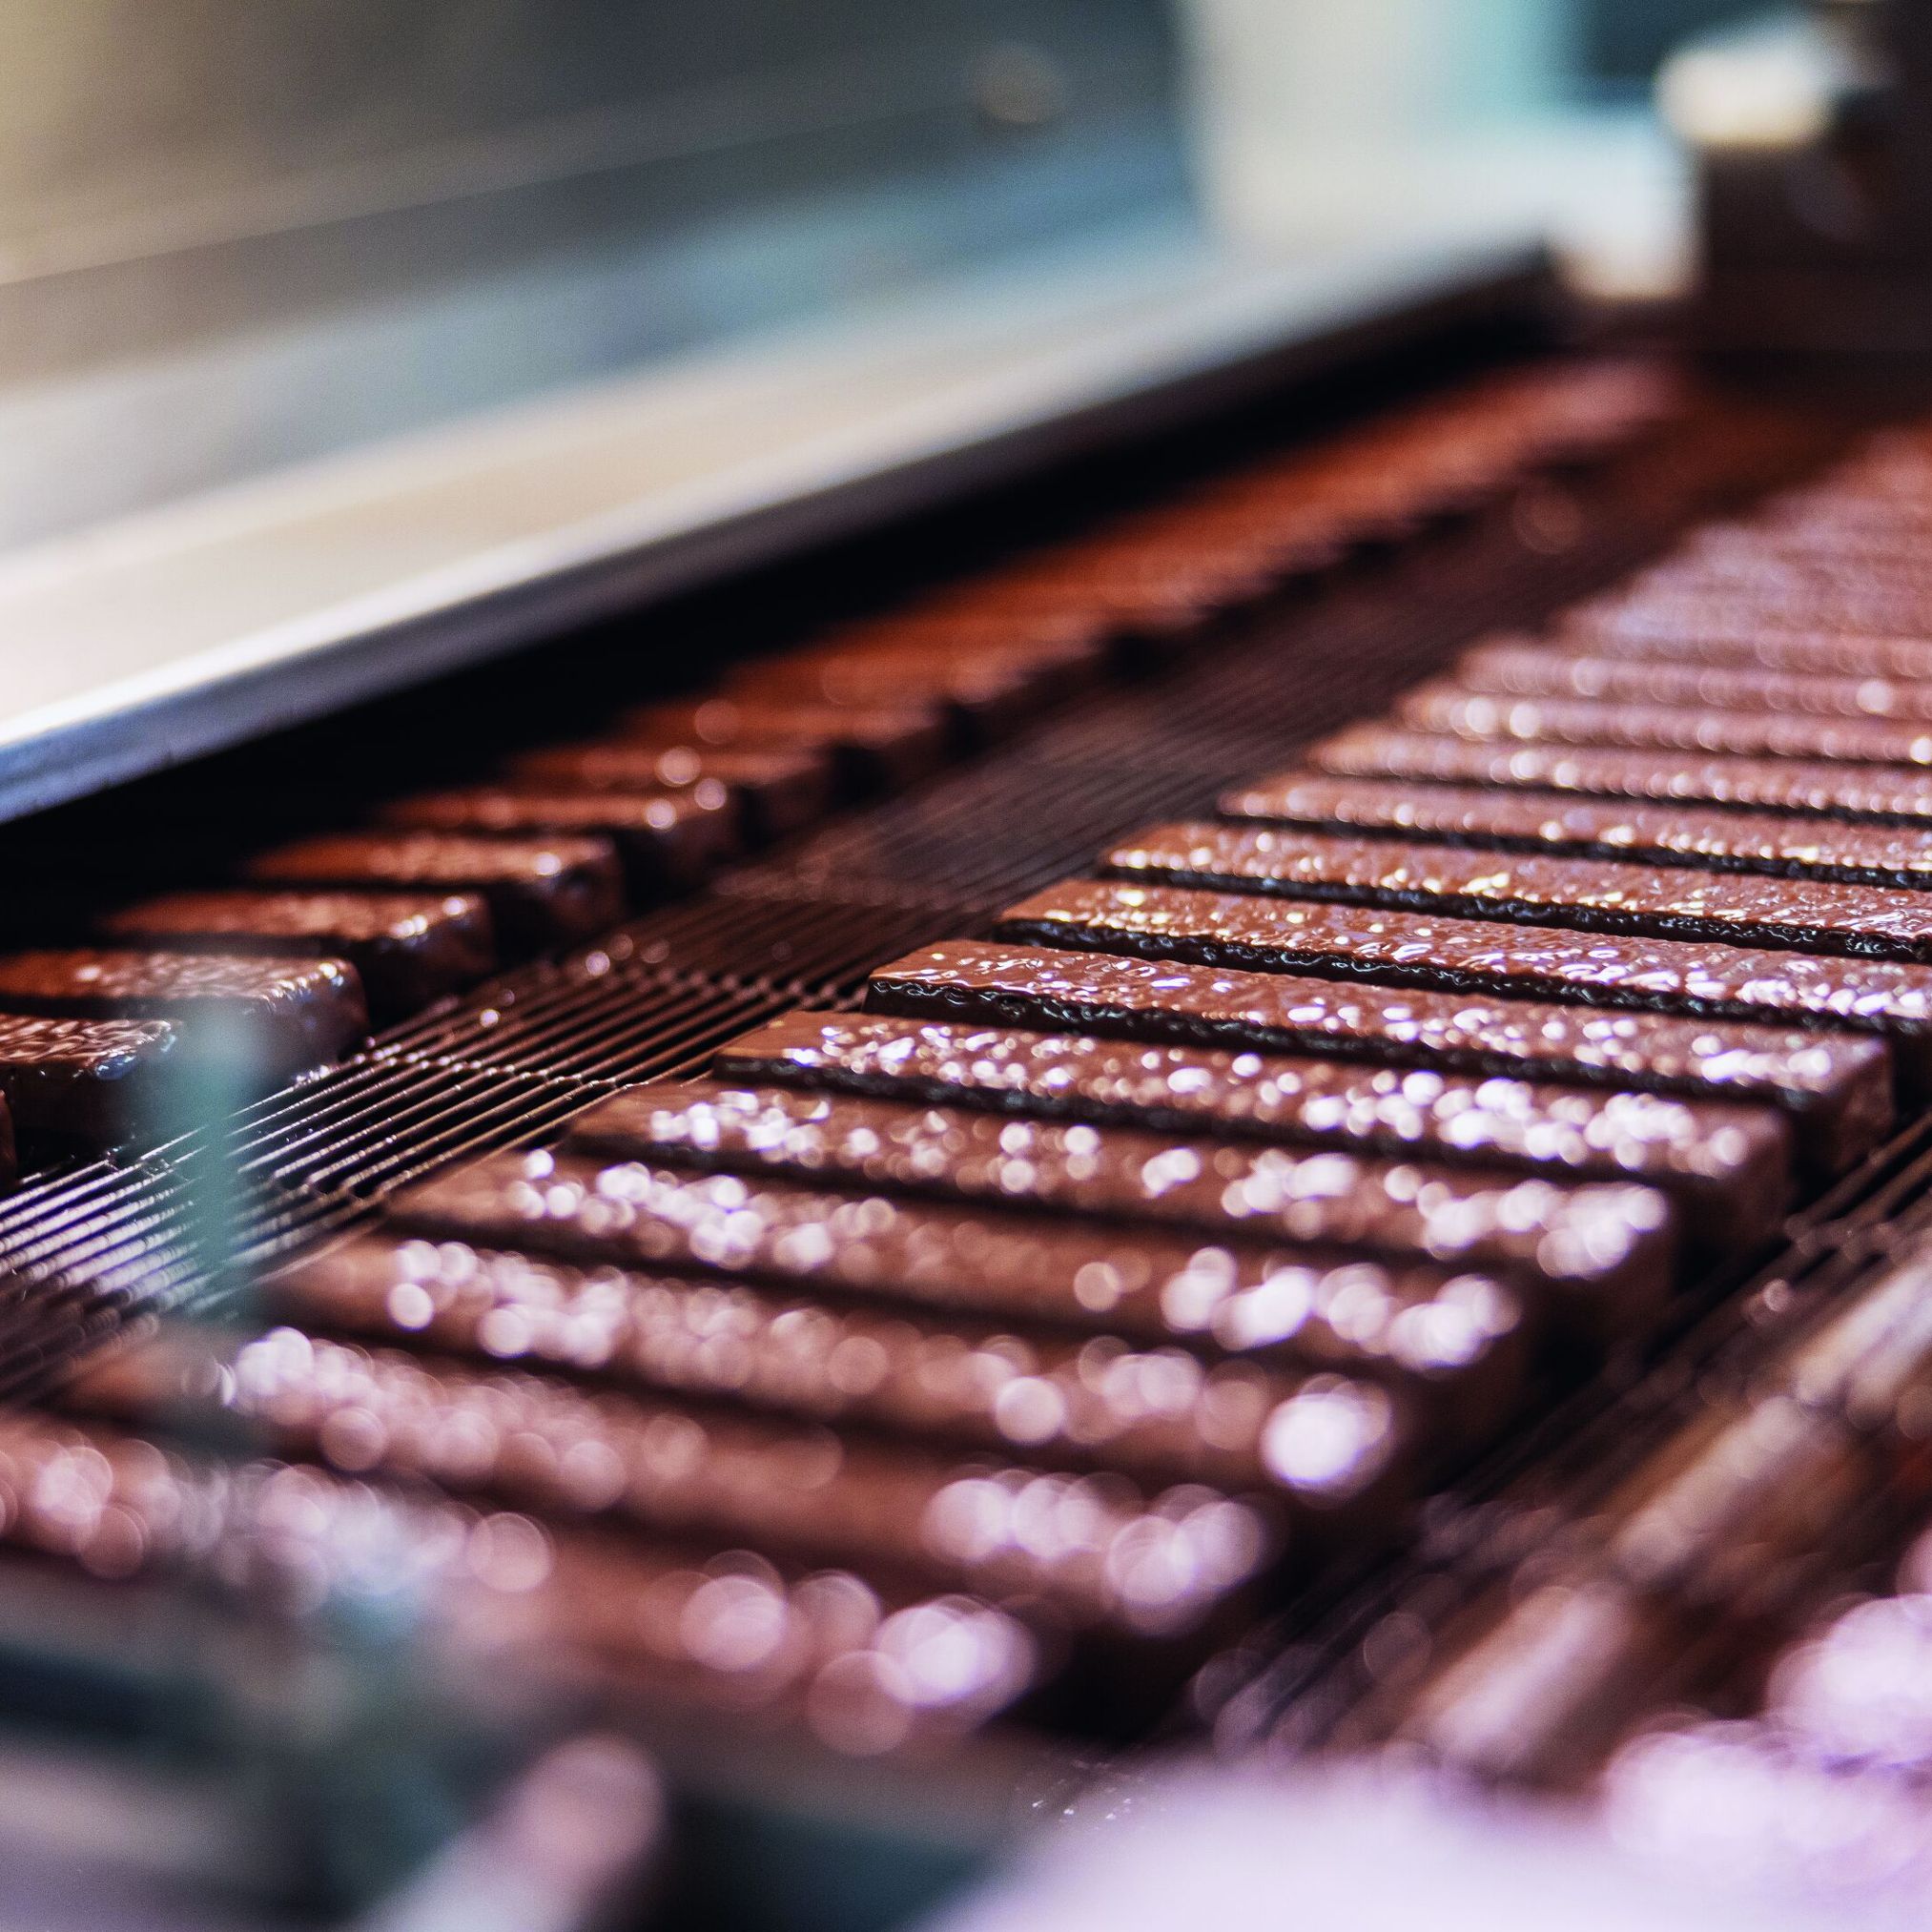 chocolate wafers produced at Kägi within one day cover a distance of 100 kilometers.